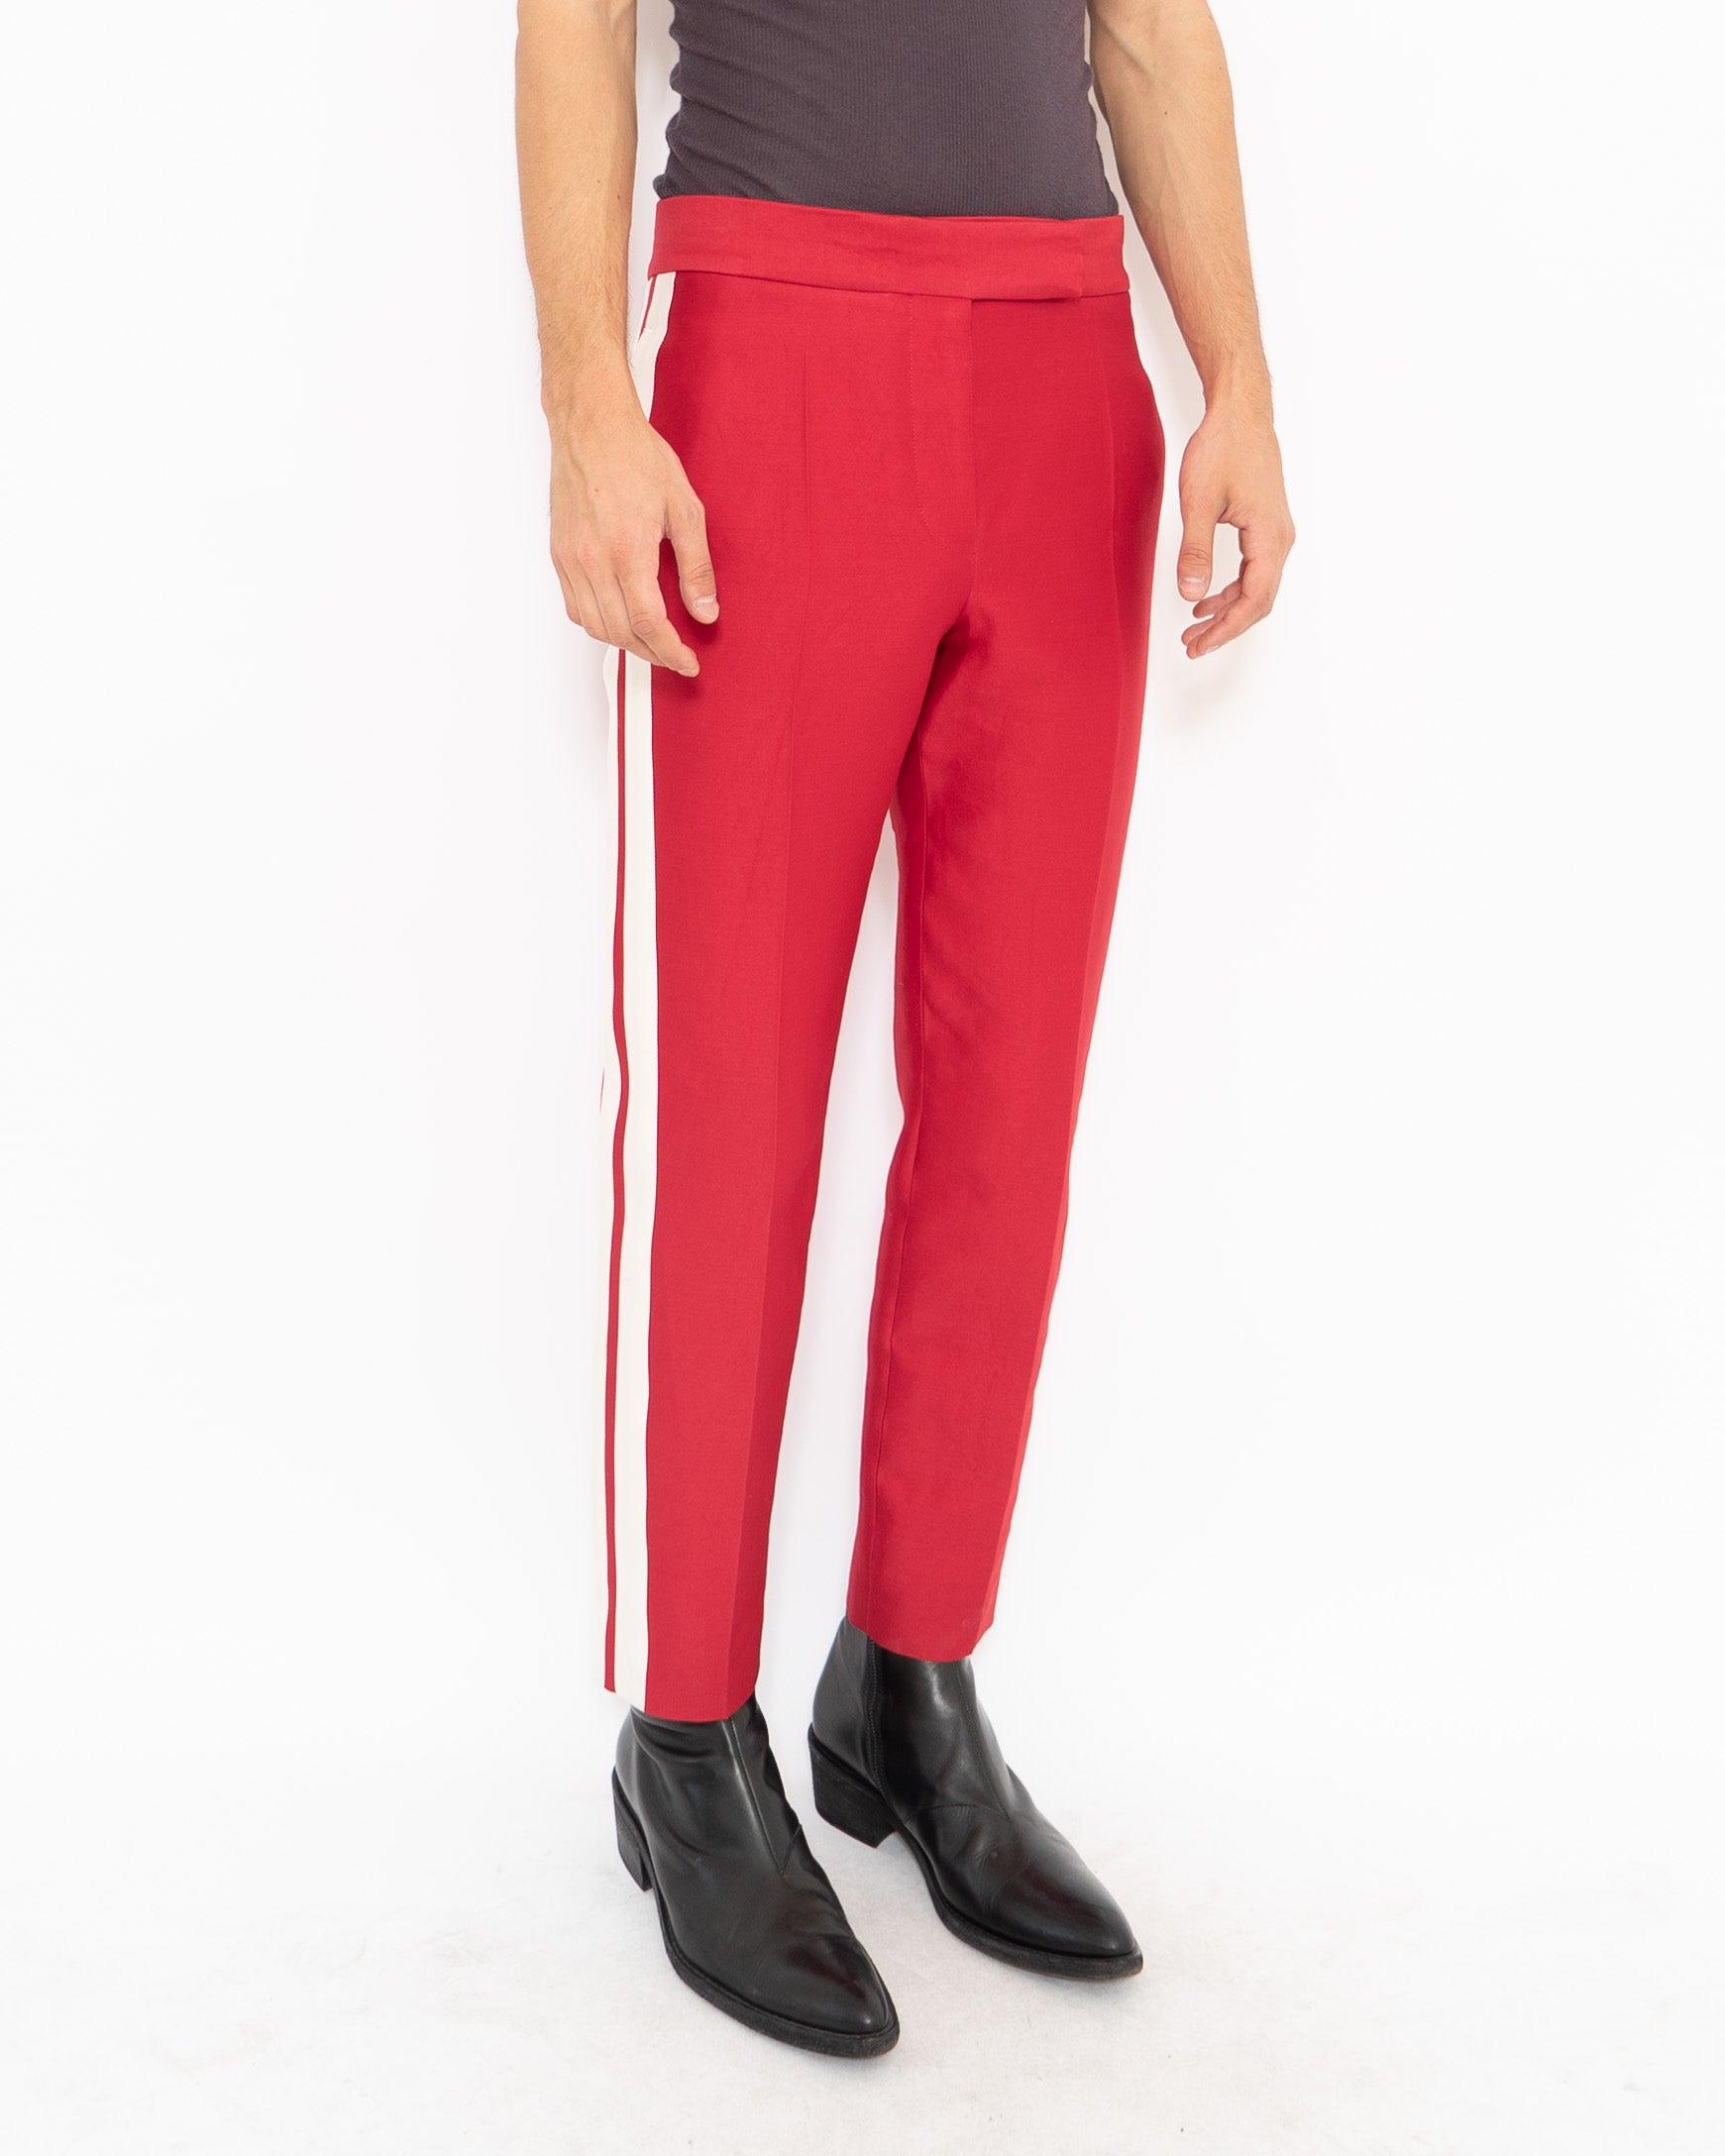 FW18 Weddel Red Striped Trousers Sample